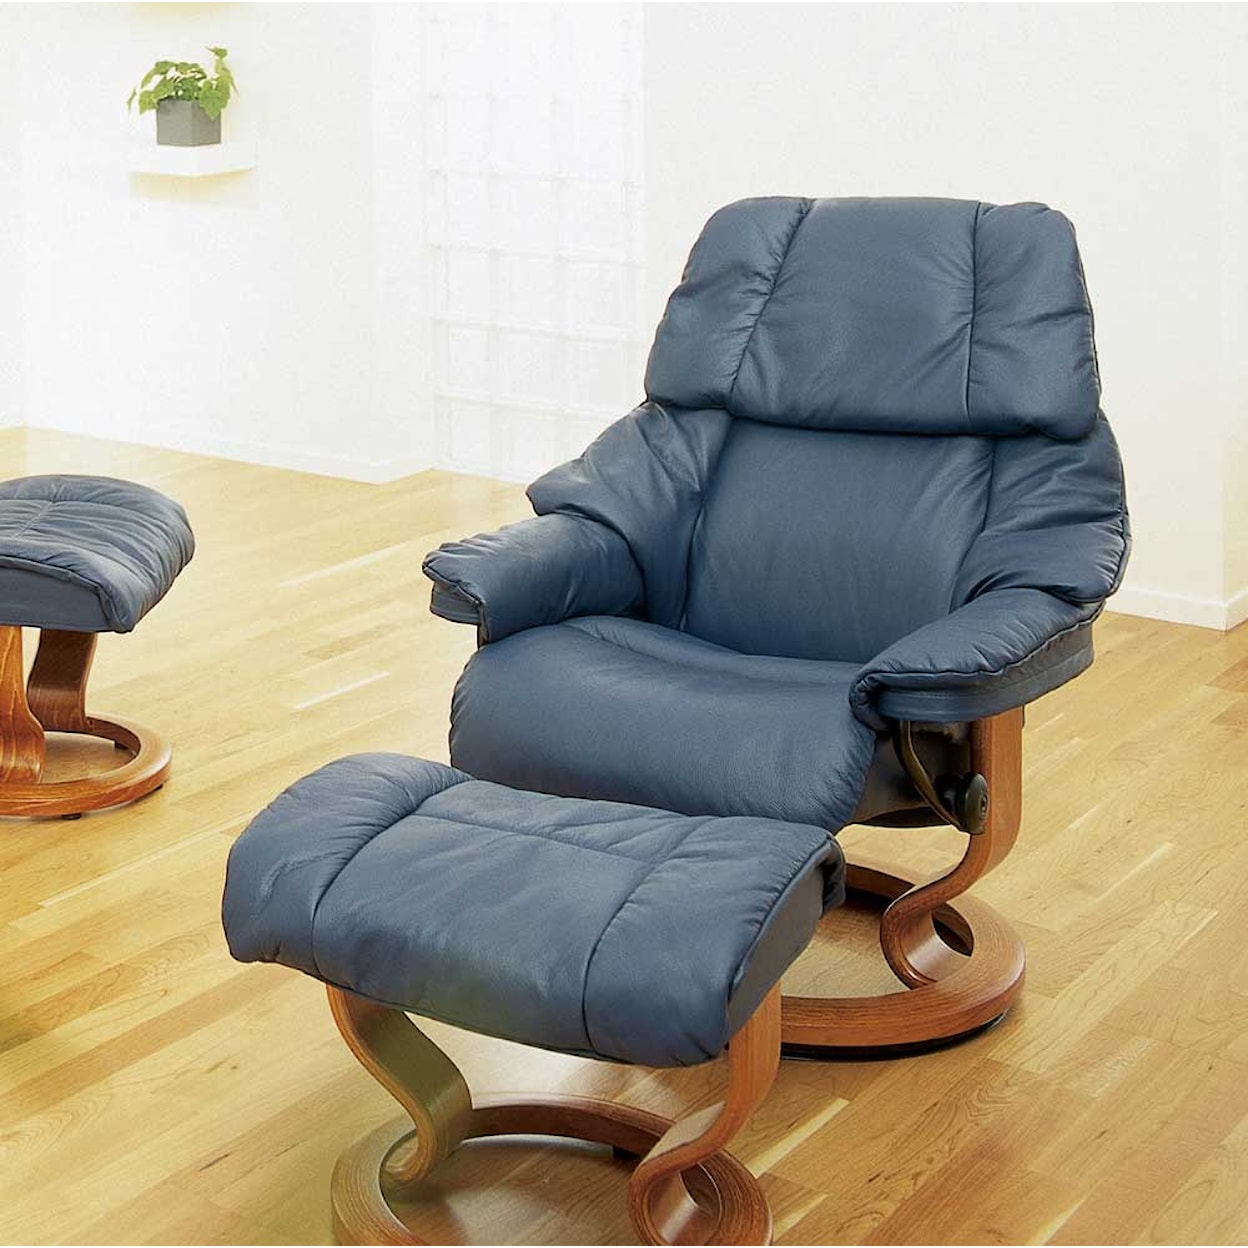 Stressless by Ekornes Reno Small Chair & Ottoman with Classic Base